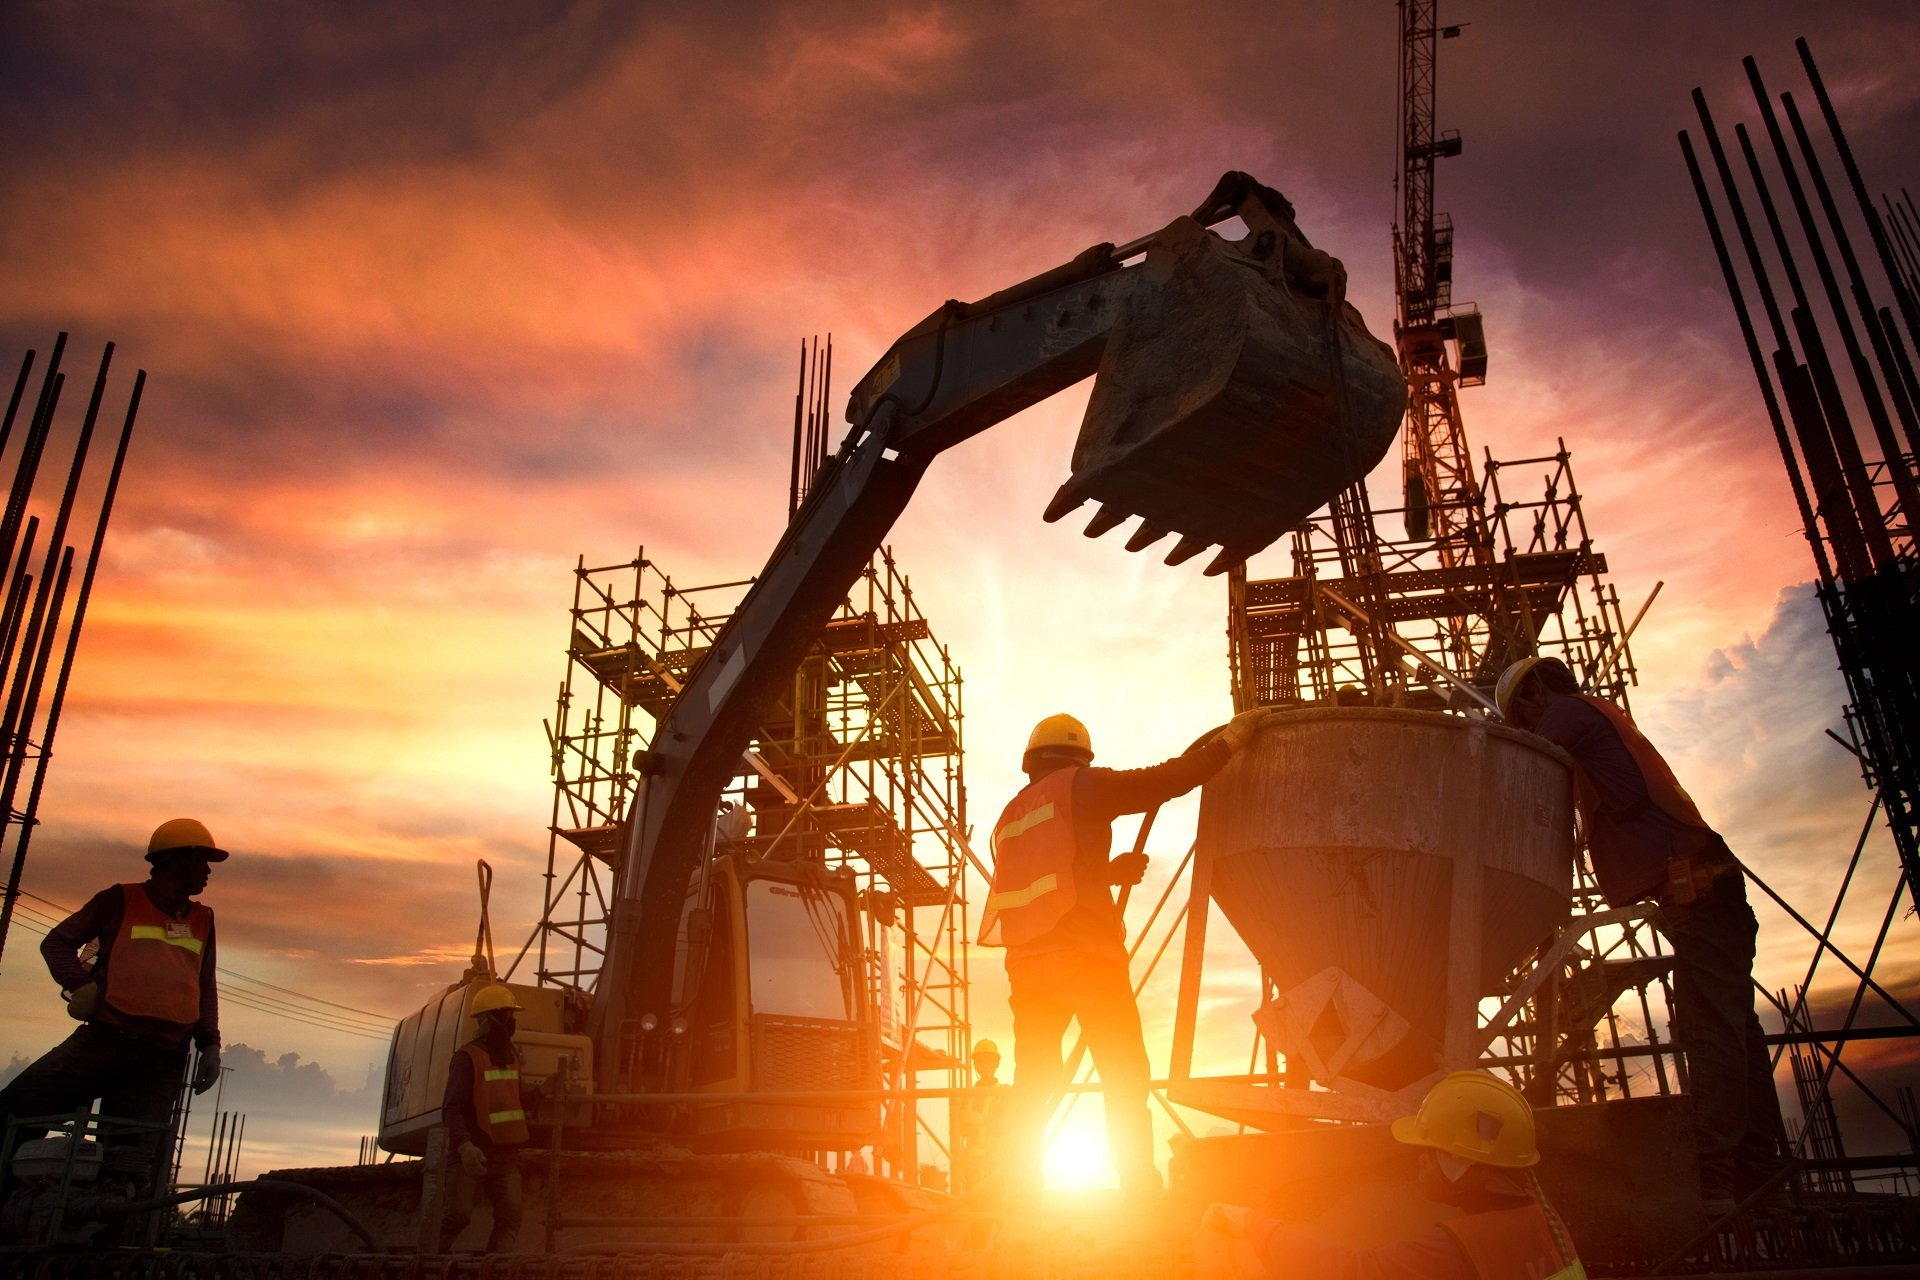 Digital Marketing Strategy for Construction Companies in 2022